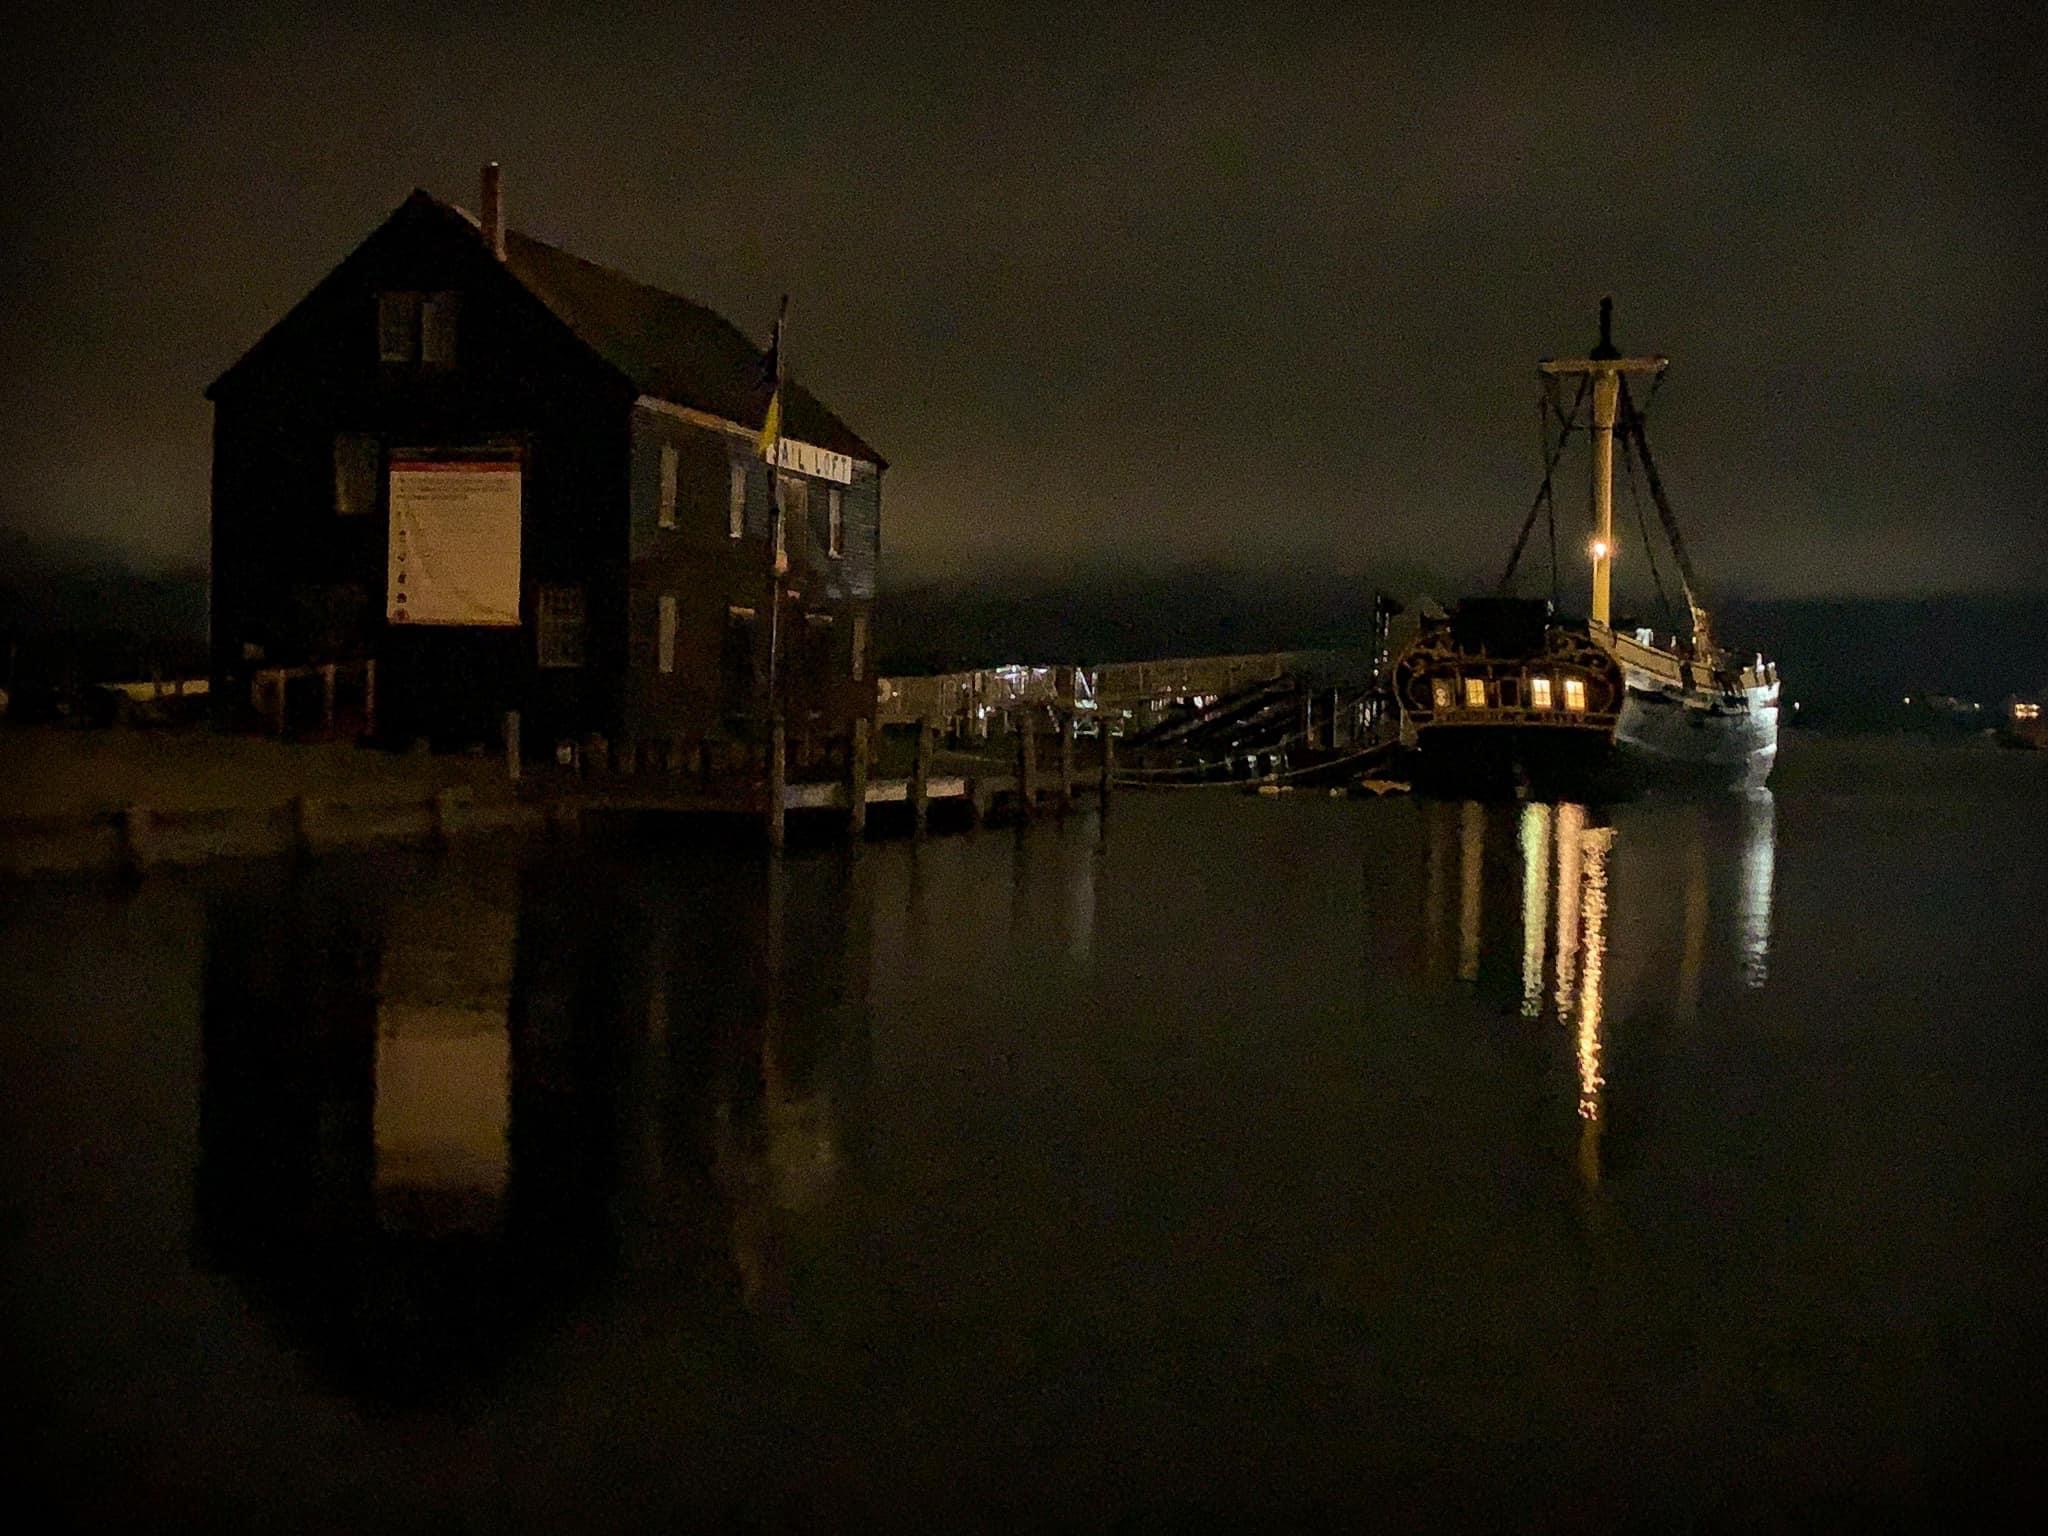 a grainy night time photo of the boat house and The Friendship of Salem docked at night with it's lights reflecting on the still water